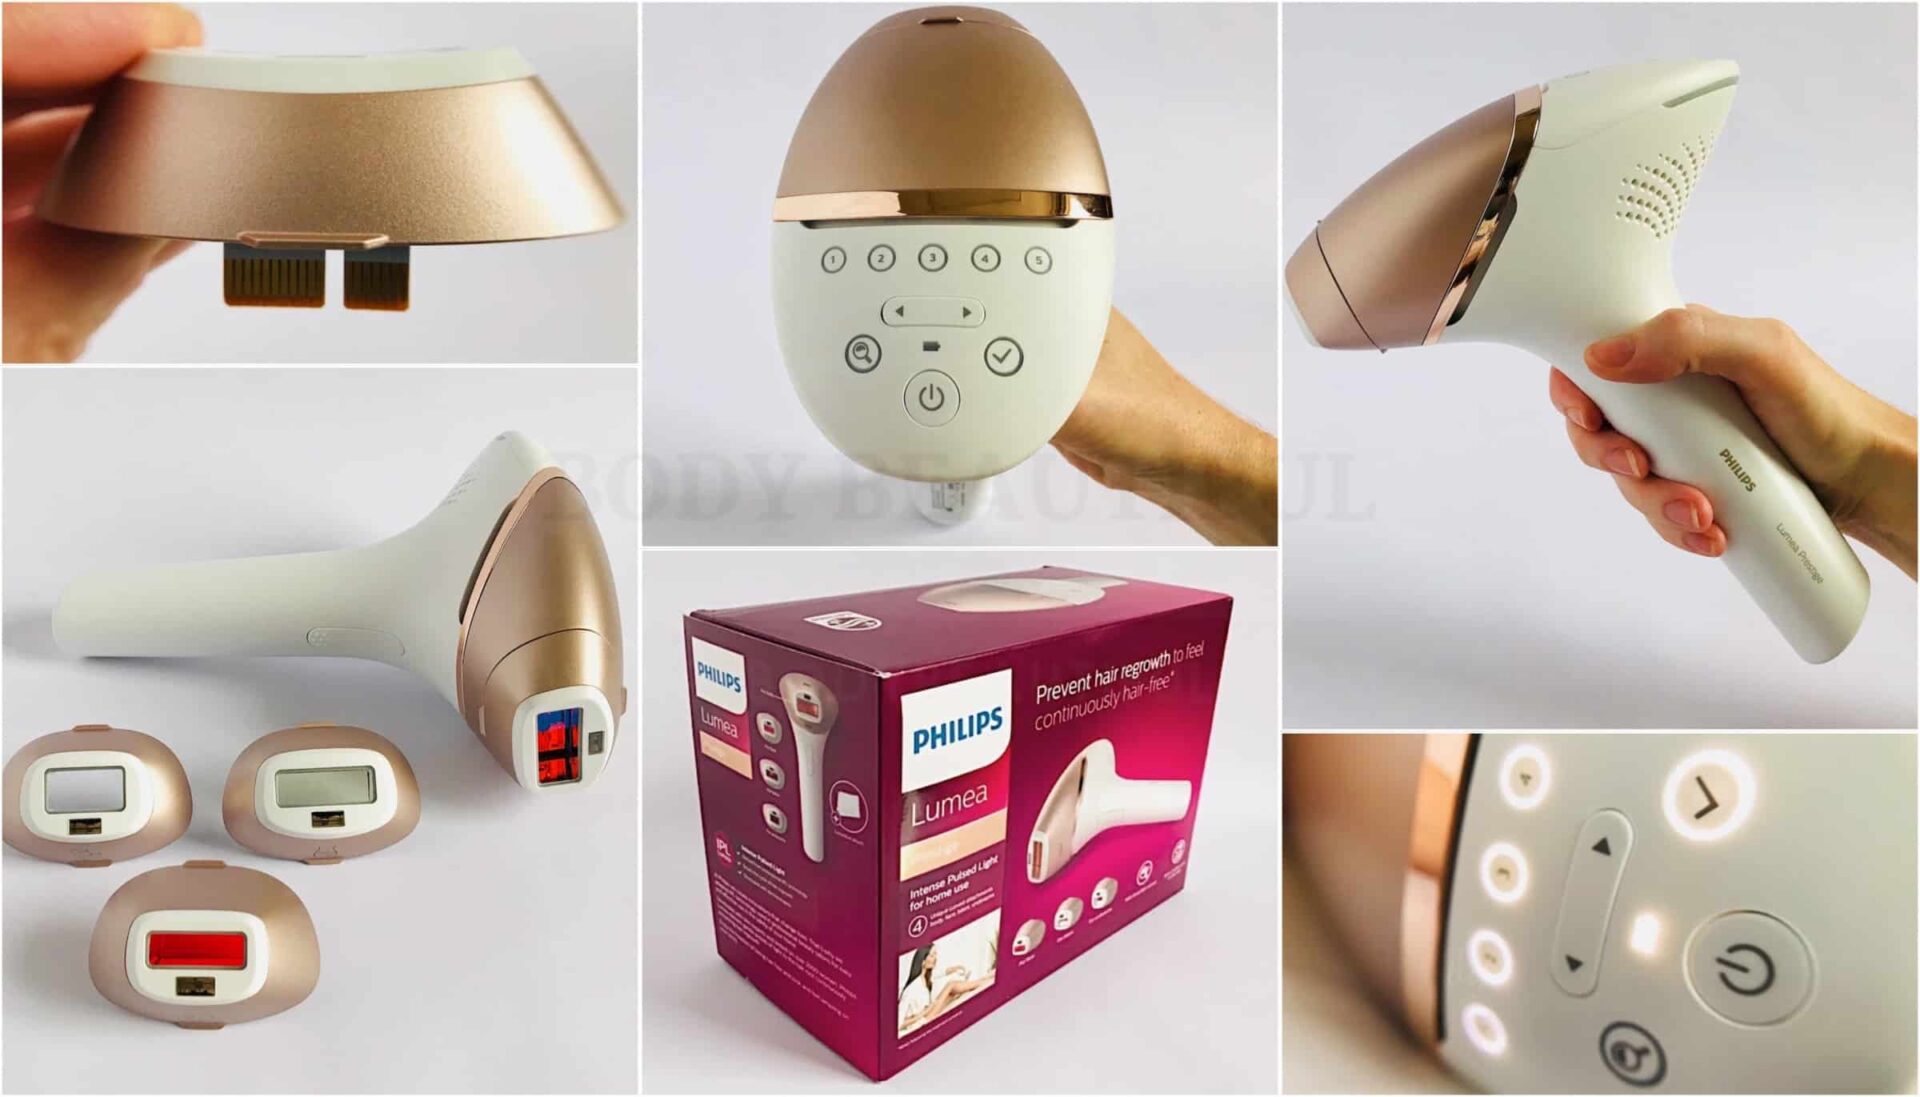 Tried-&-tested Philips Lumea Prestige review & summary video